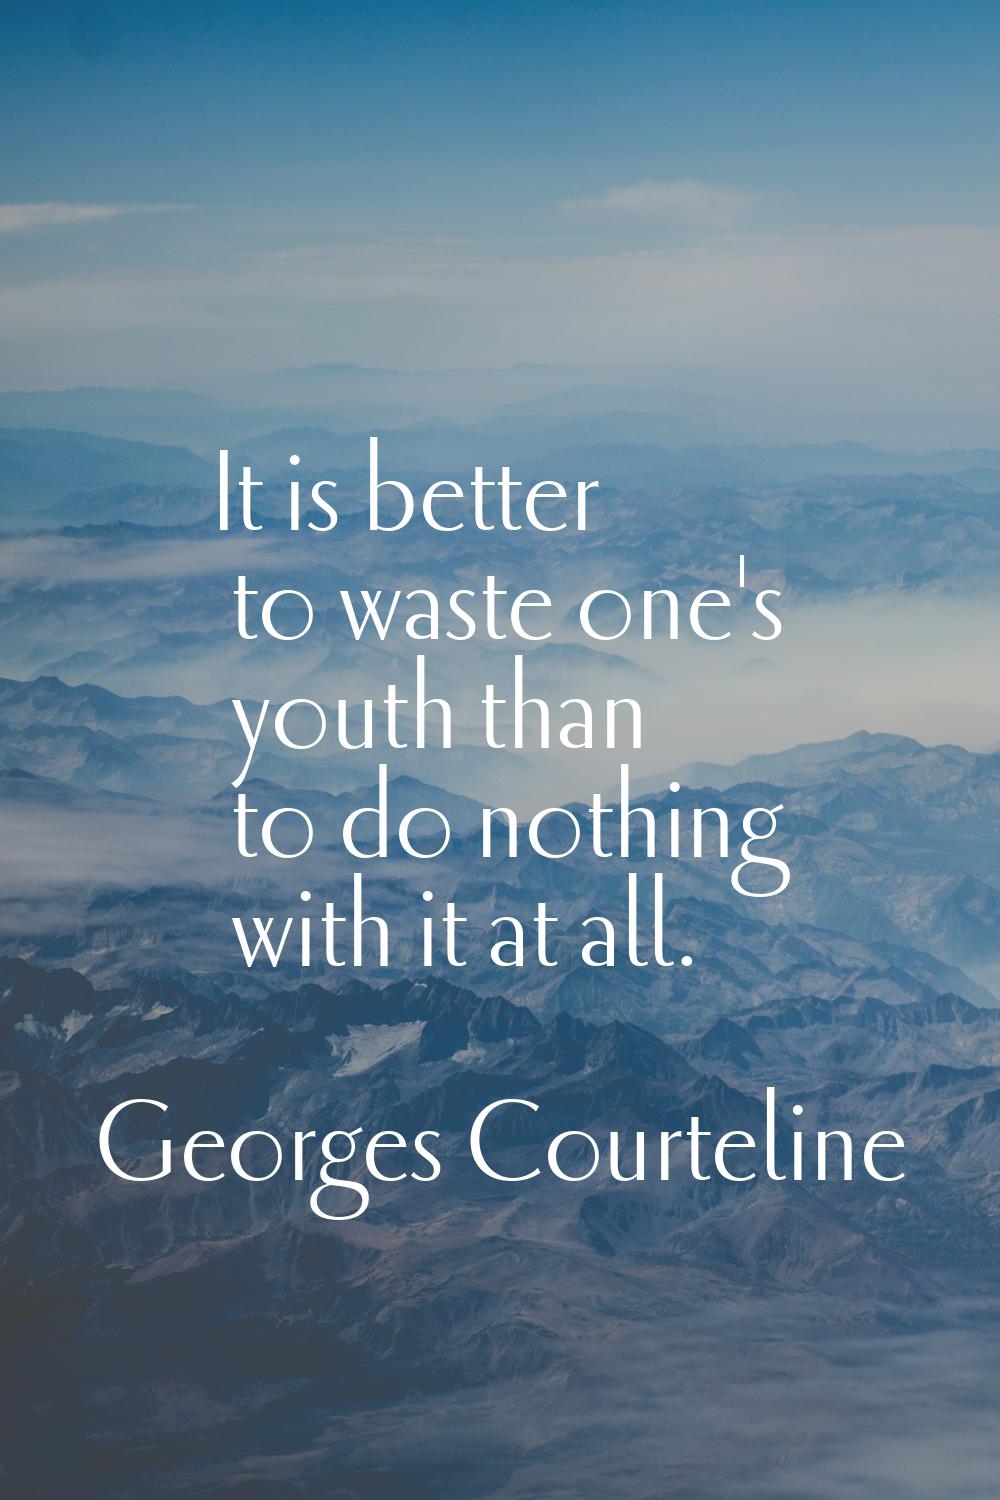 It is better to waste one's youth than to do nothing with it at all.